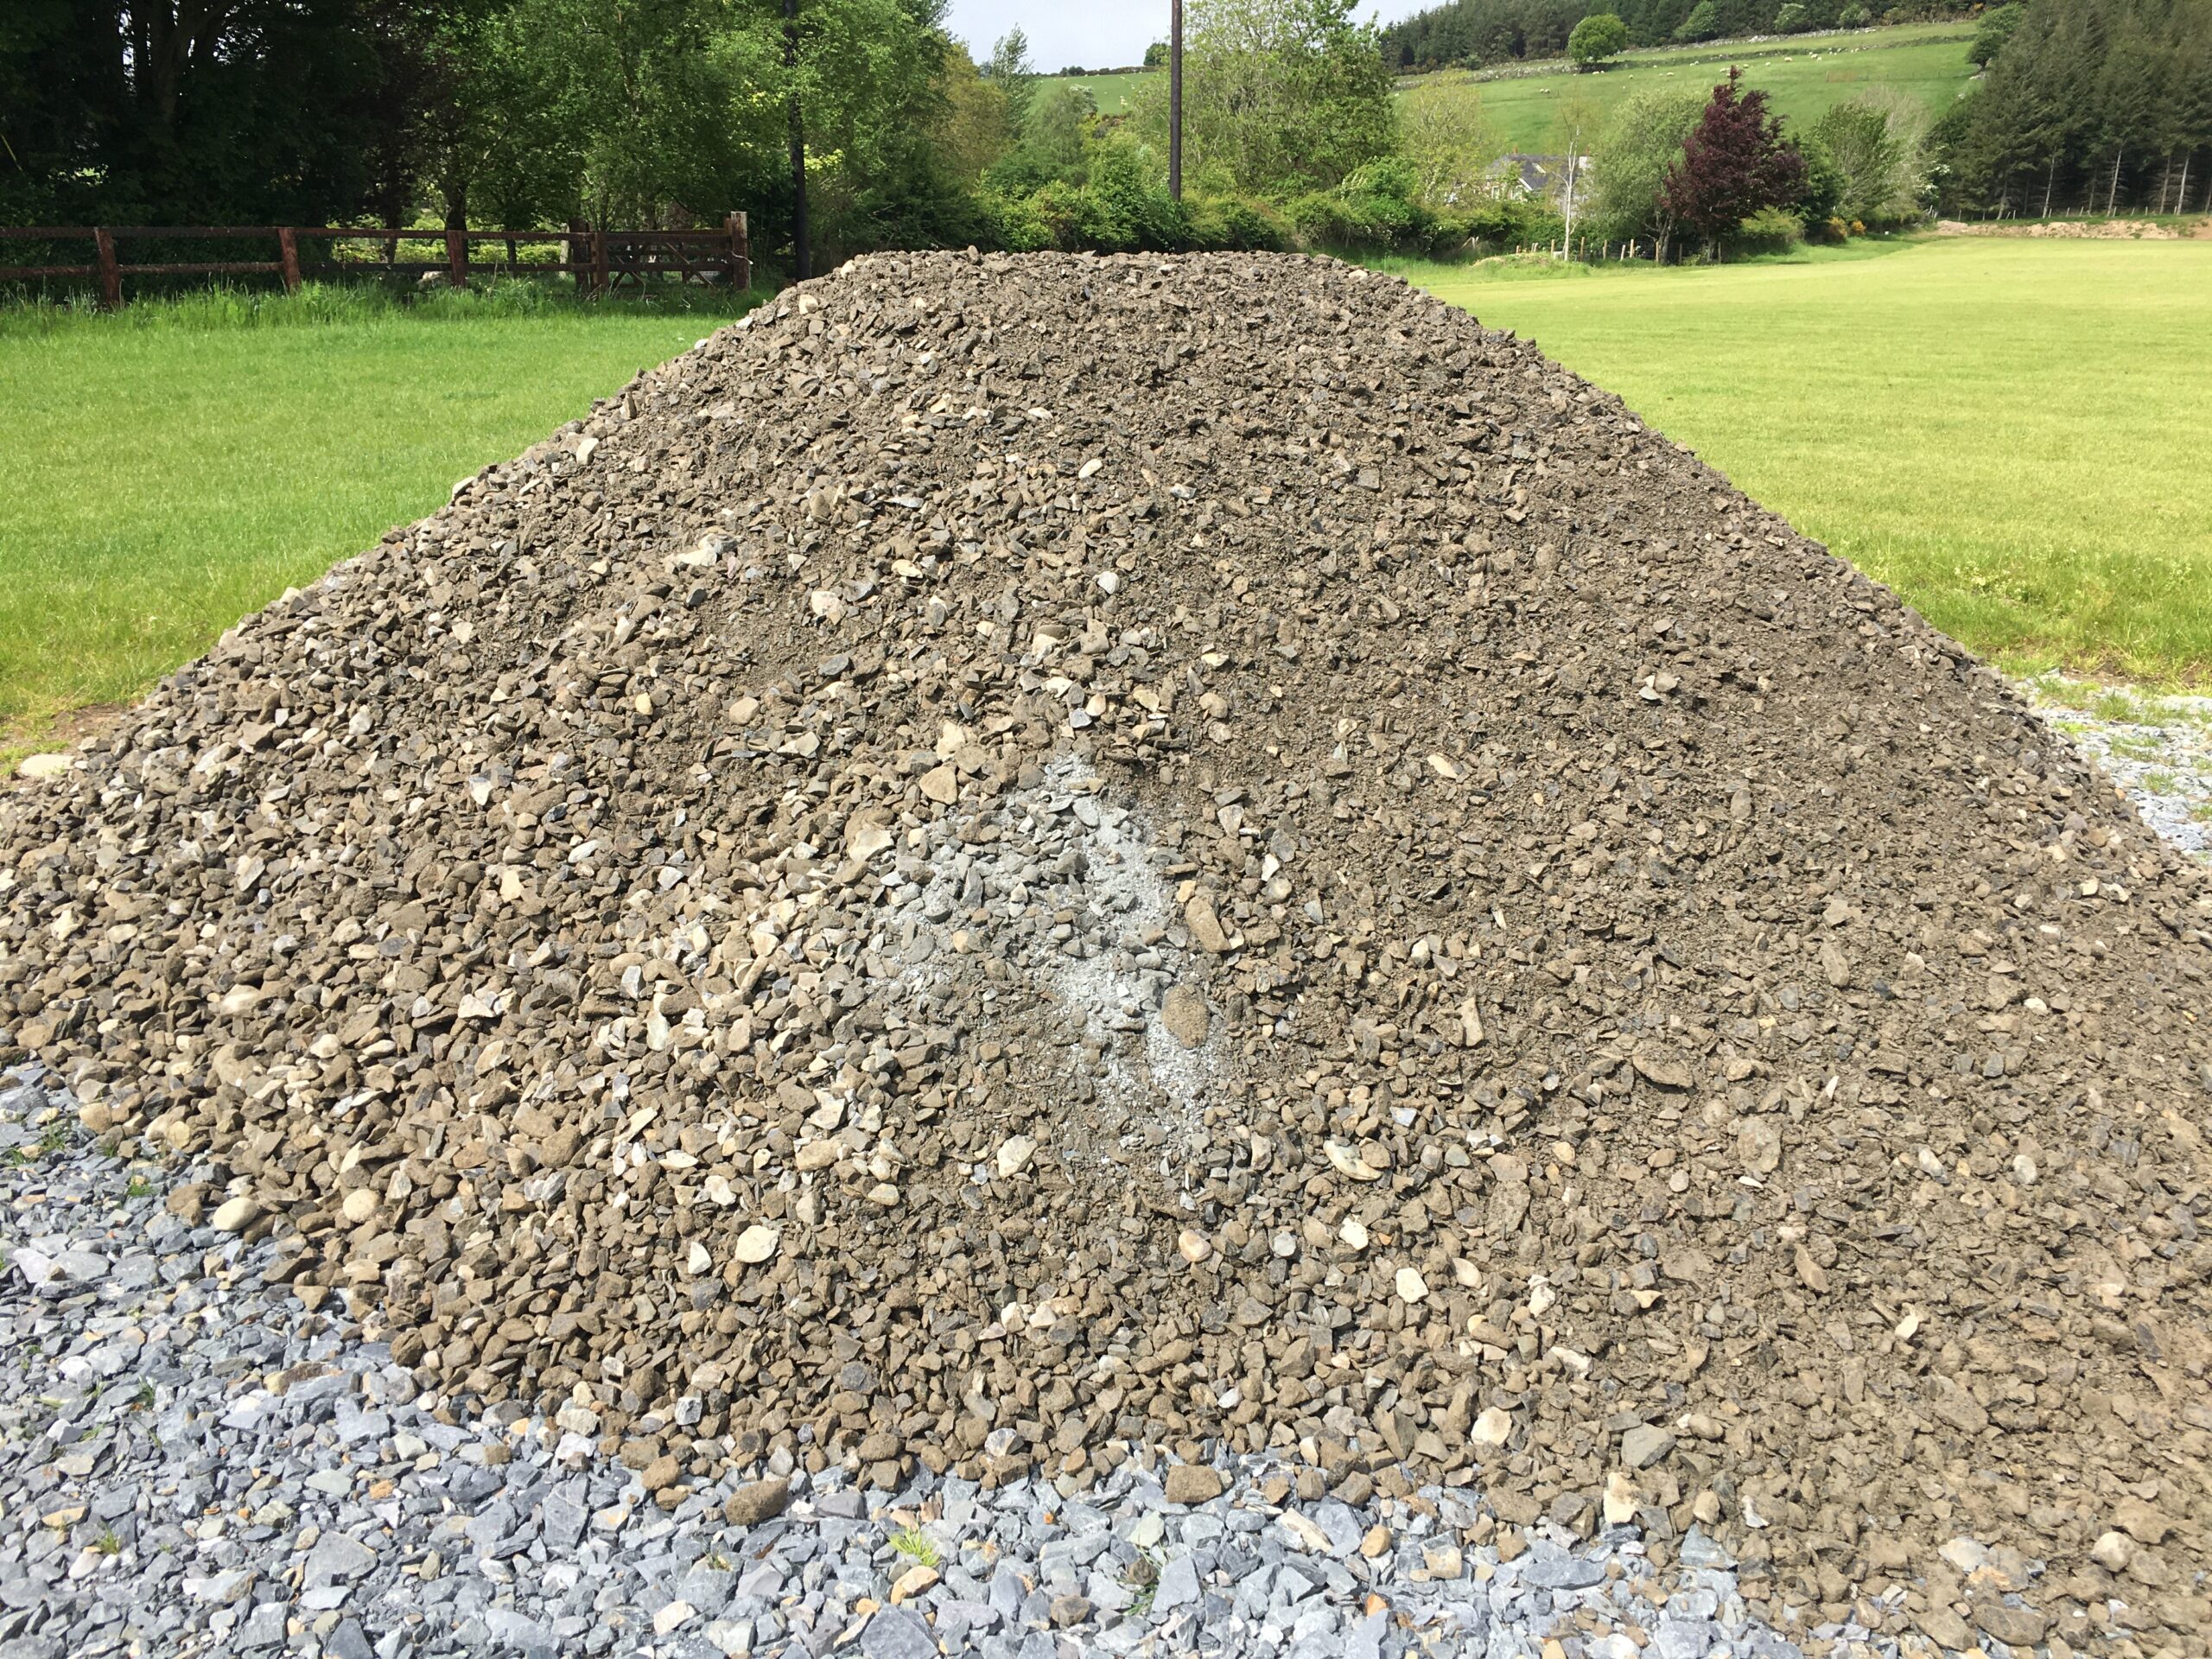 Start of Walking Track Project – HUDSONS deliver T1 Stone to Kilbride GAA Site